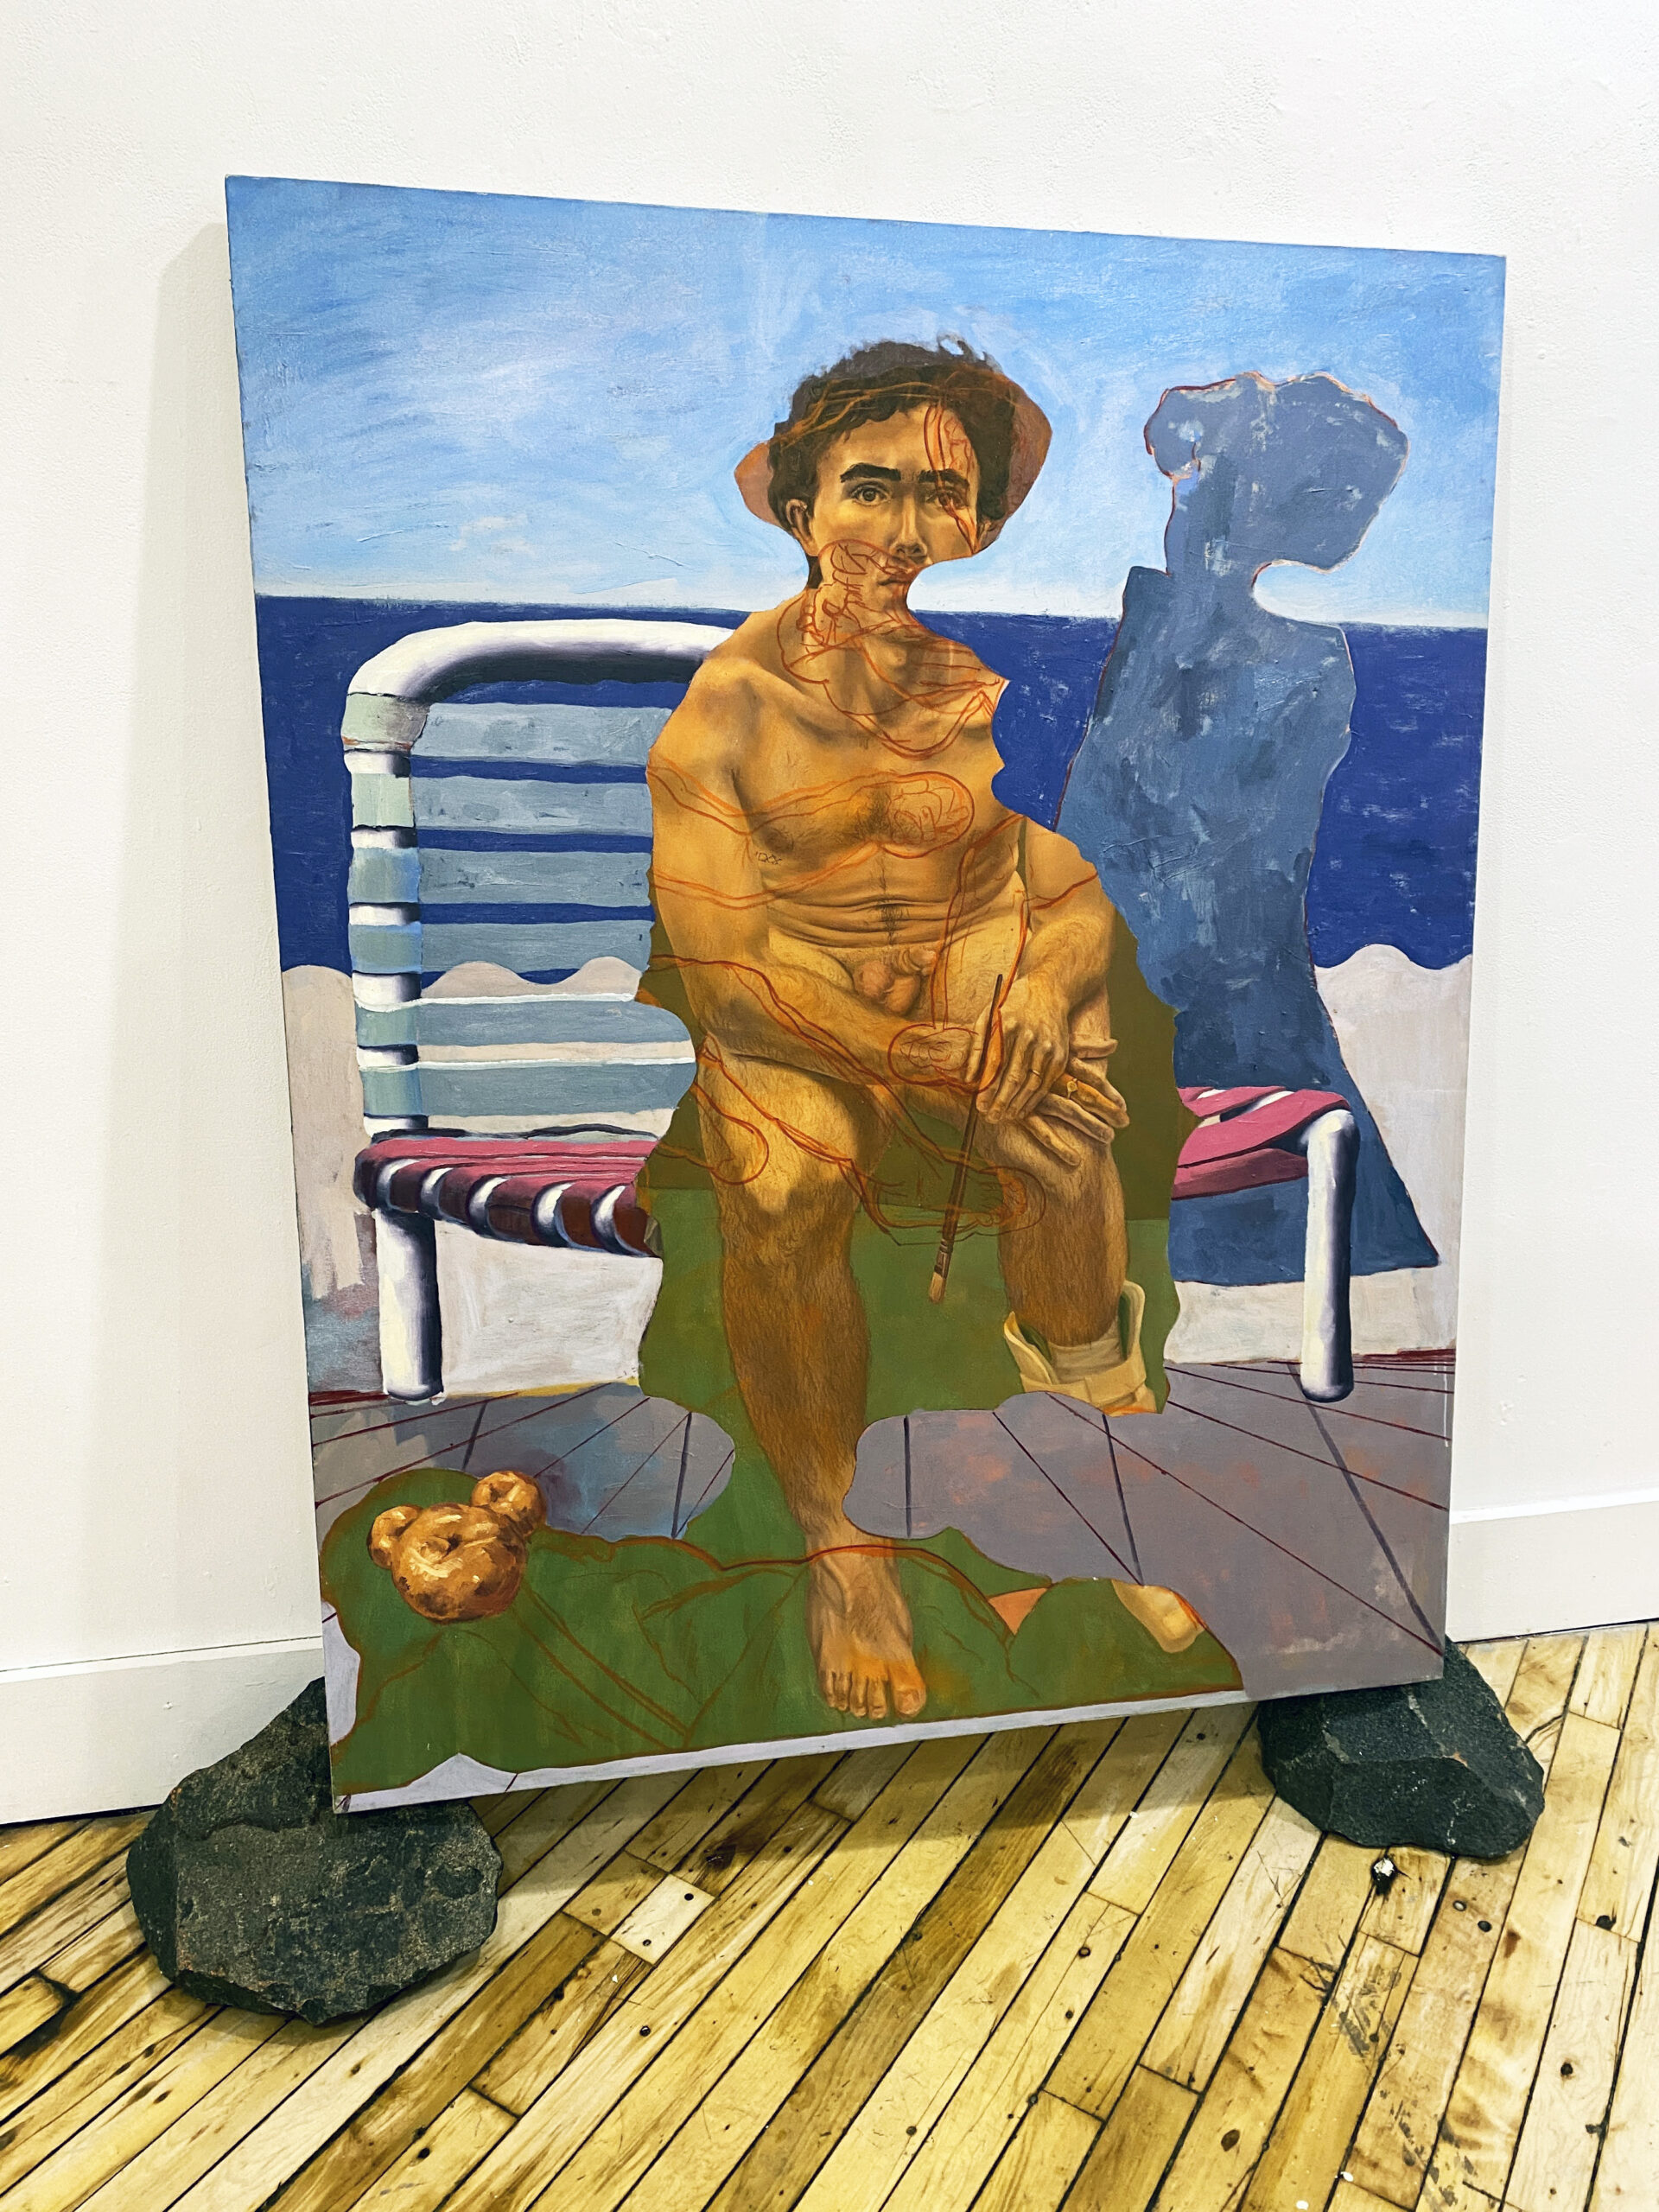 A painting of nude man sitting on a beach chair.